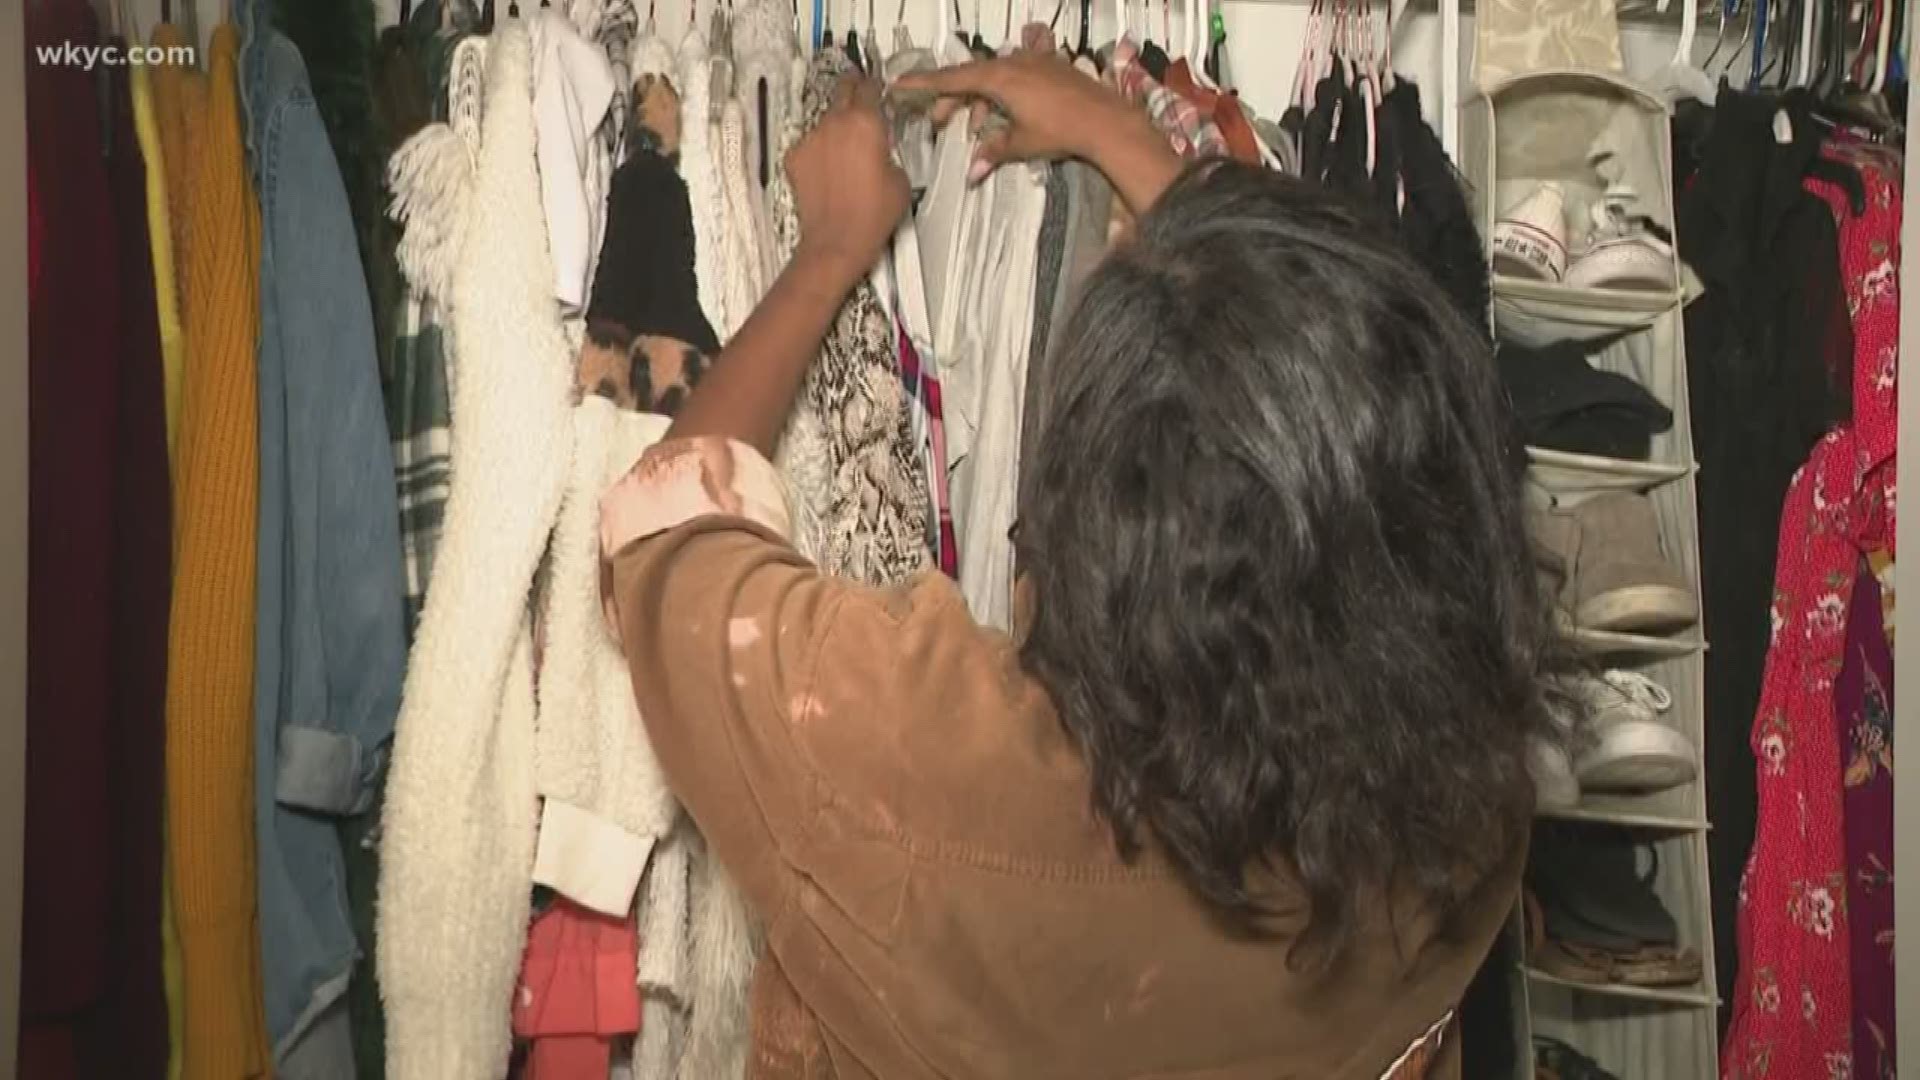 Looking for something to do while you have all this extra time at home? How about cleaning out your closet? We went to an expert who had 3 simple tips to help.